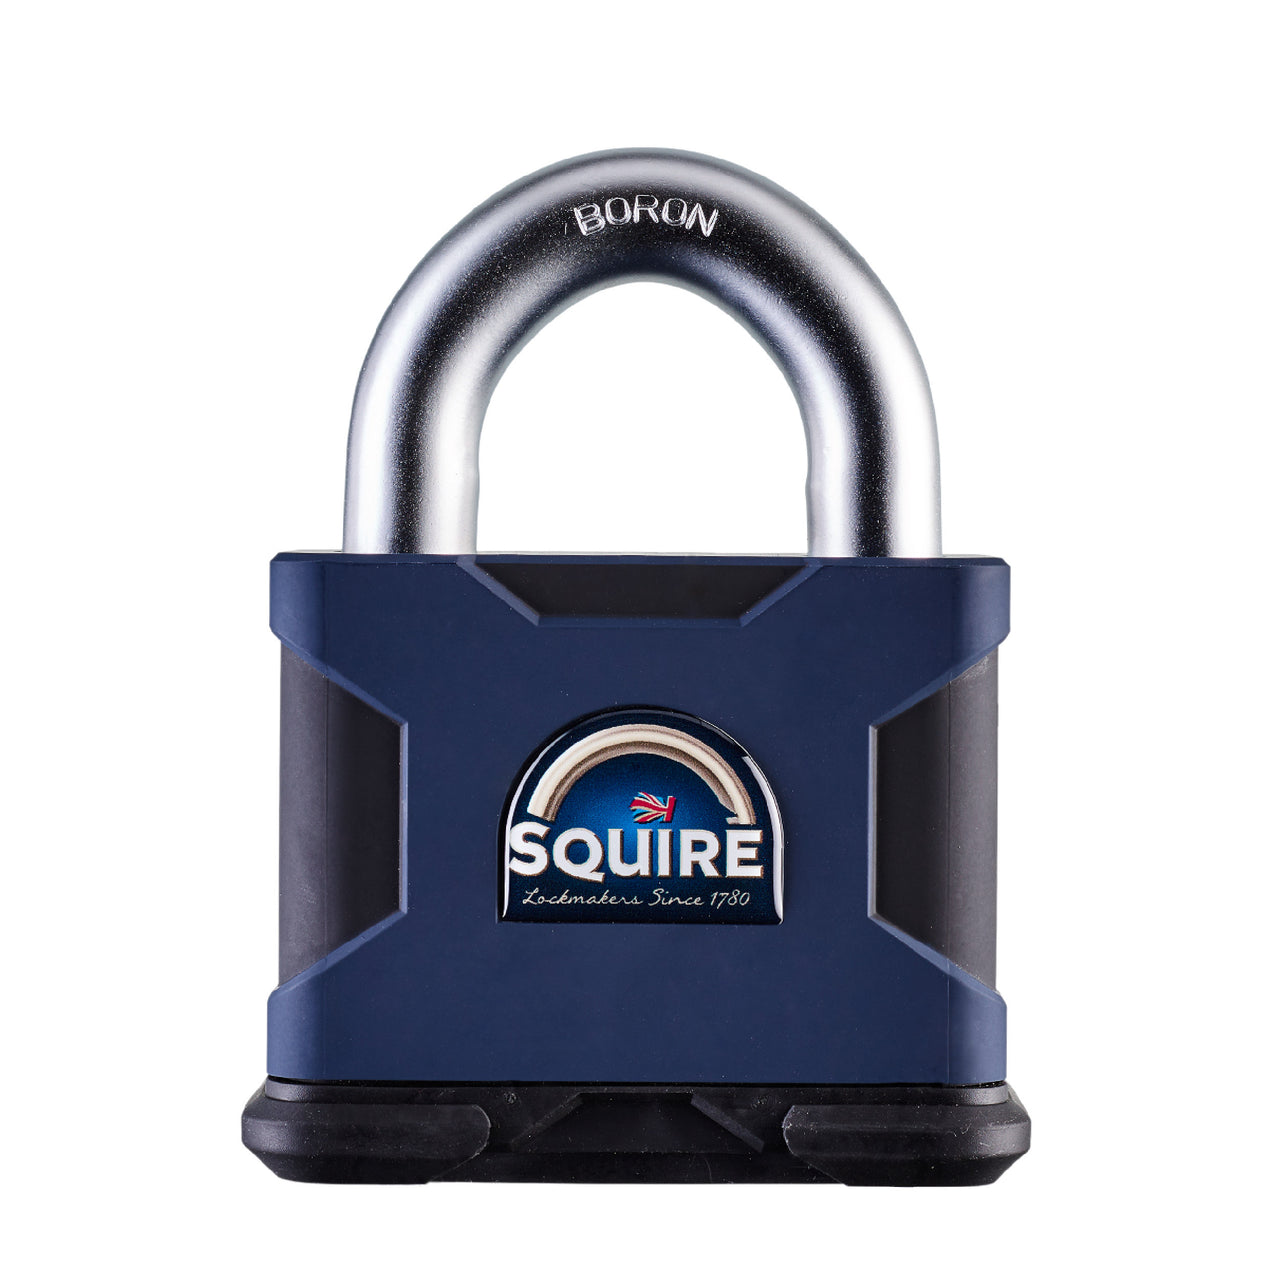 Squire SS100S Open Shackle | Boron Steel Padlock